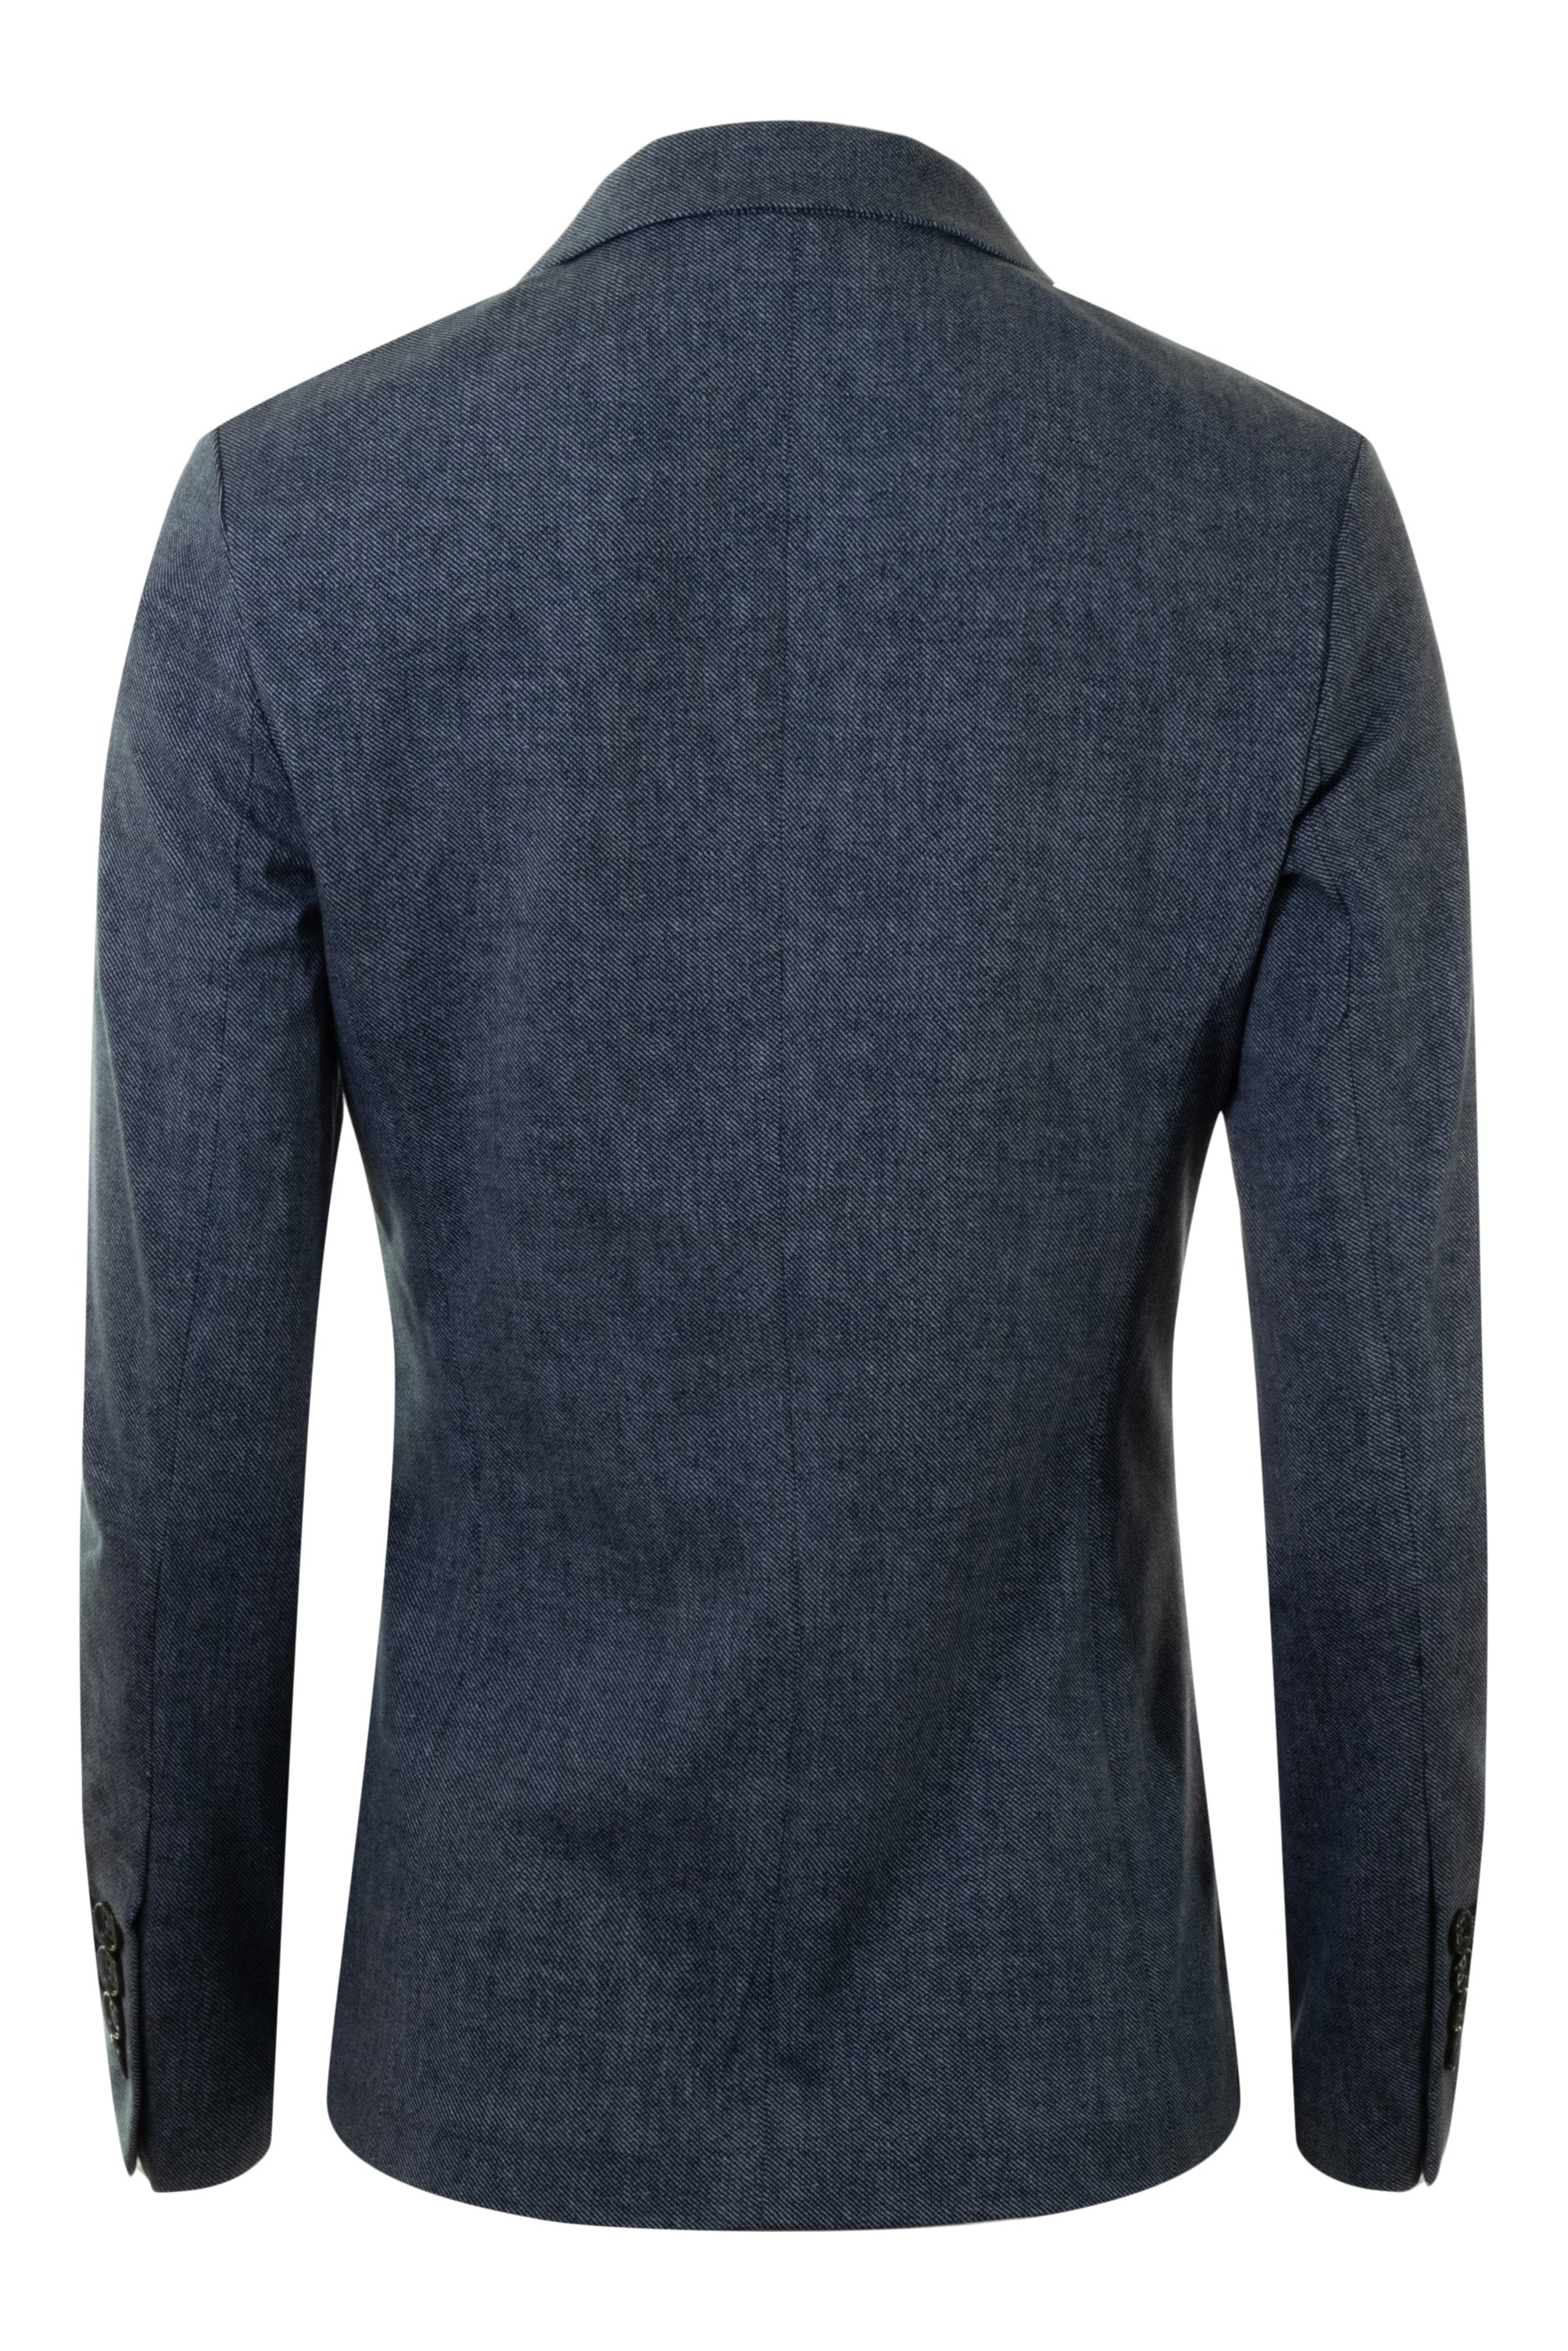 Circolo 1901 2 Button Knit Jacket in Indaco